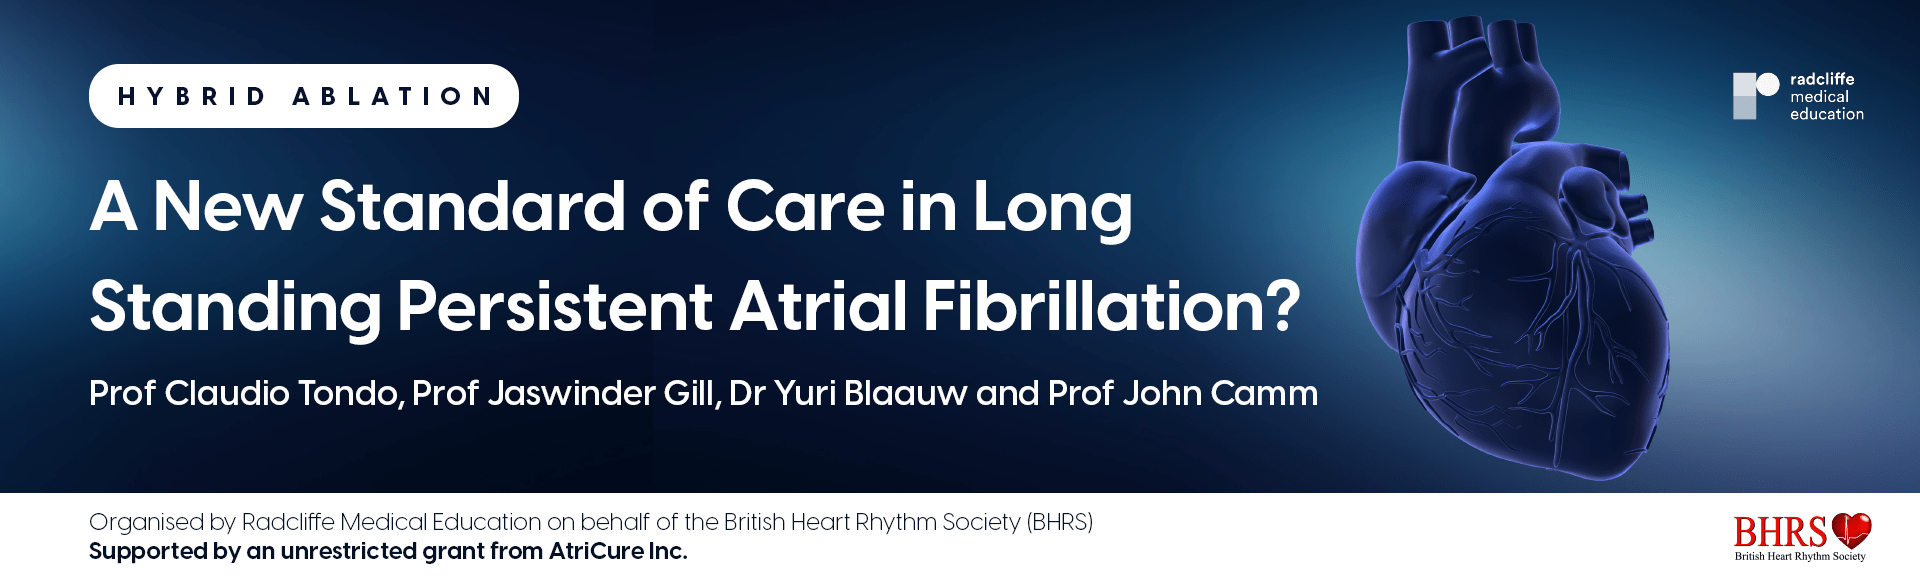 Hybrid Ablation: A New Standard of Care in Long Standing Persistent Atrial Fibrillation?